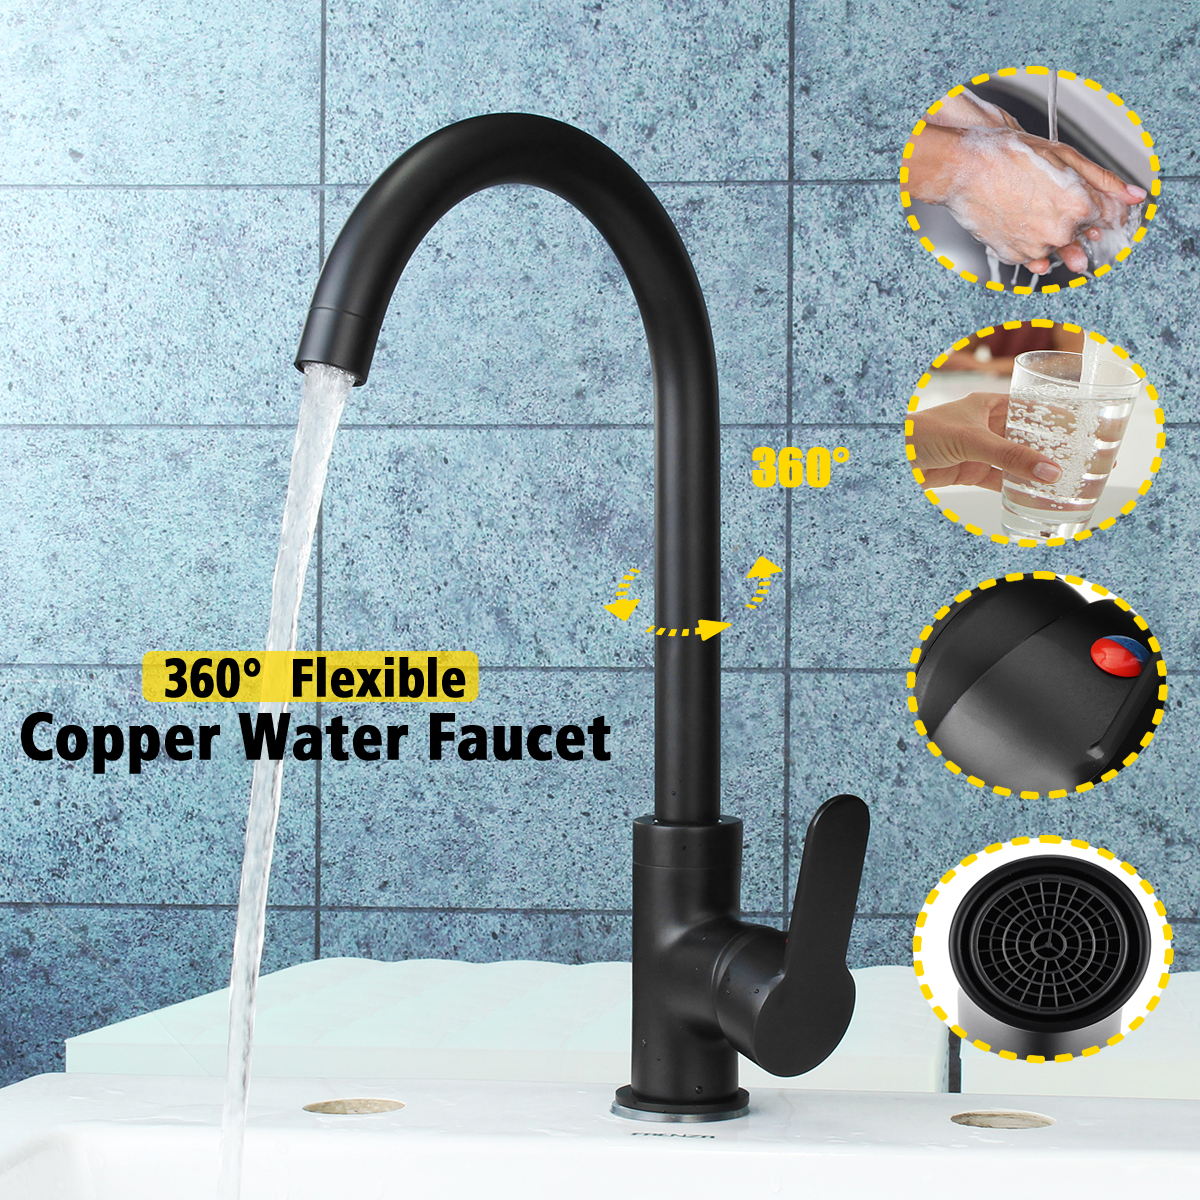 Black-Copper-Kitchen-Faucet-360deg-Rotation-Single-Lever-Hot-amp-Cold-Water-Basin-Sink-Mixer-Tap-1375770